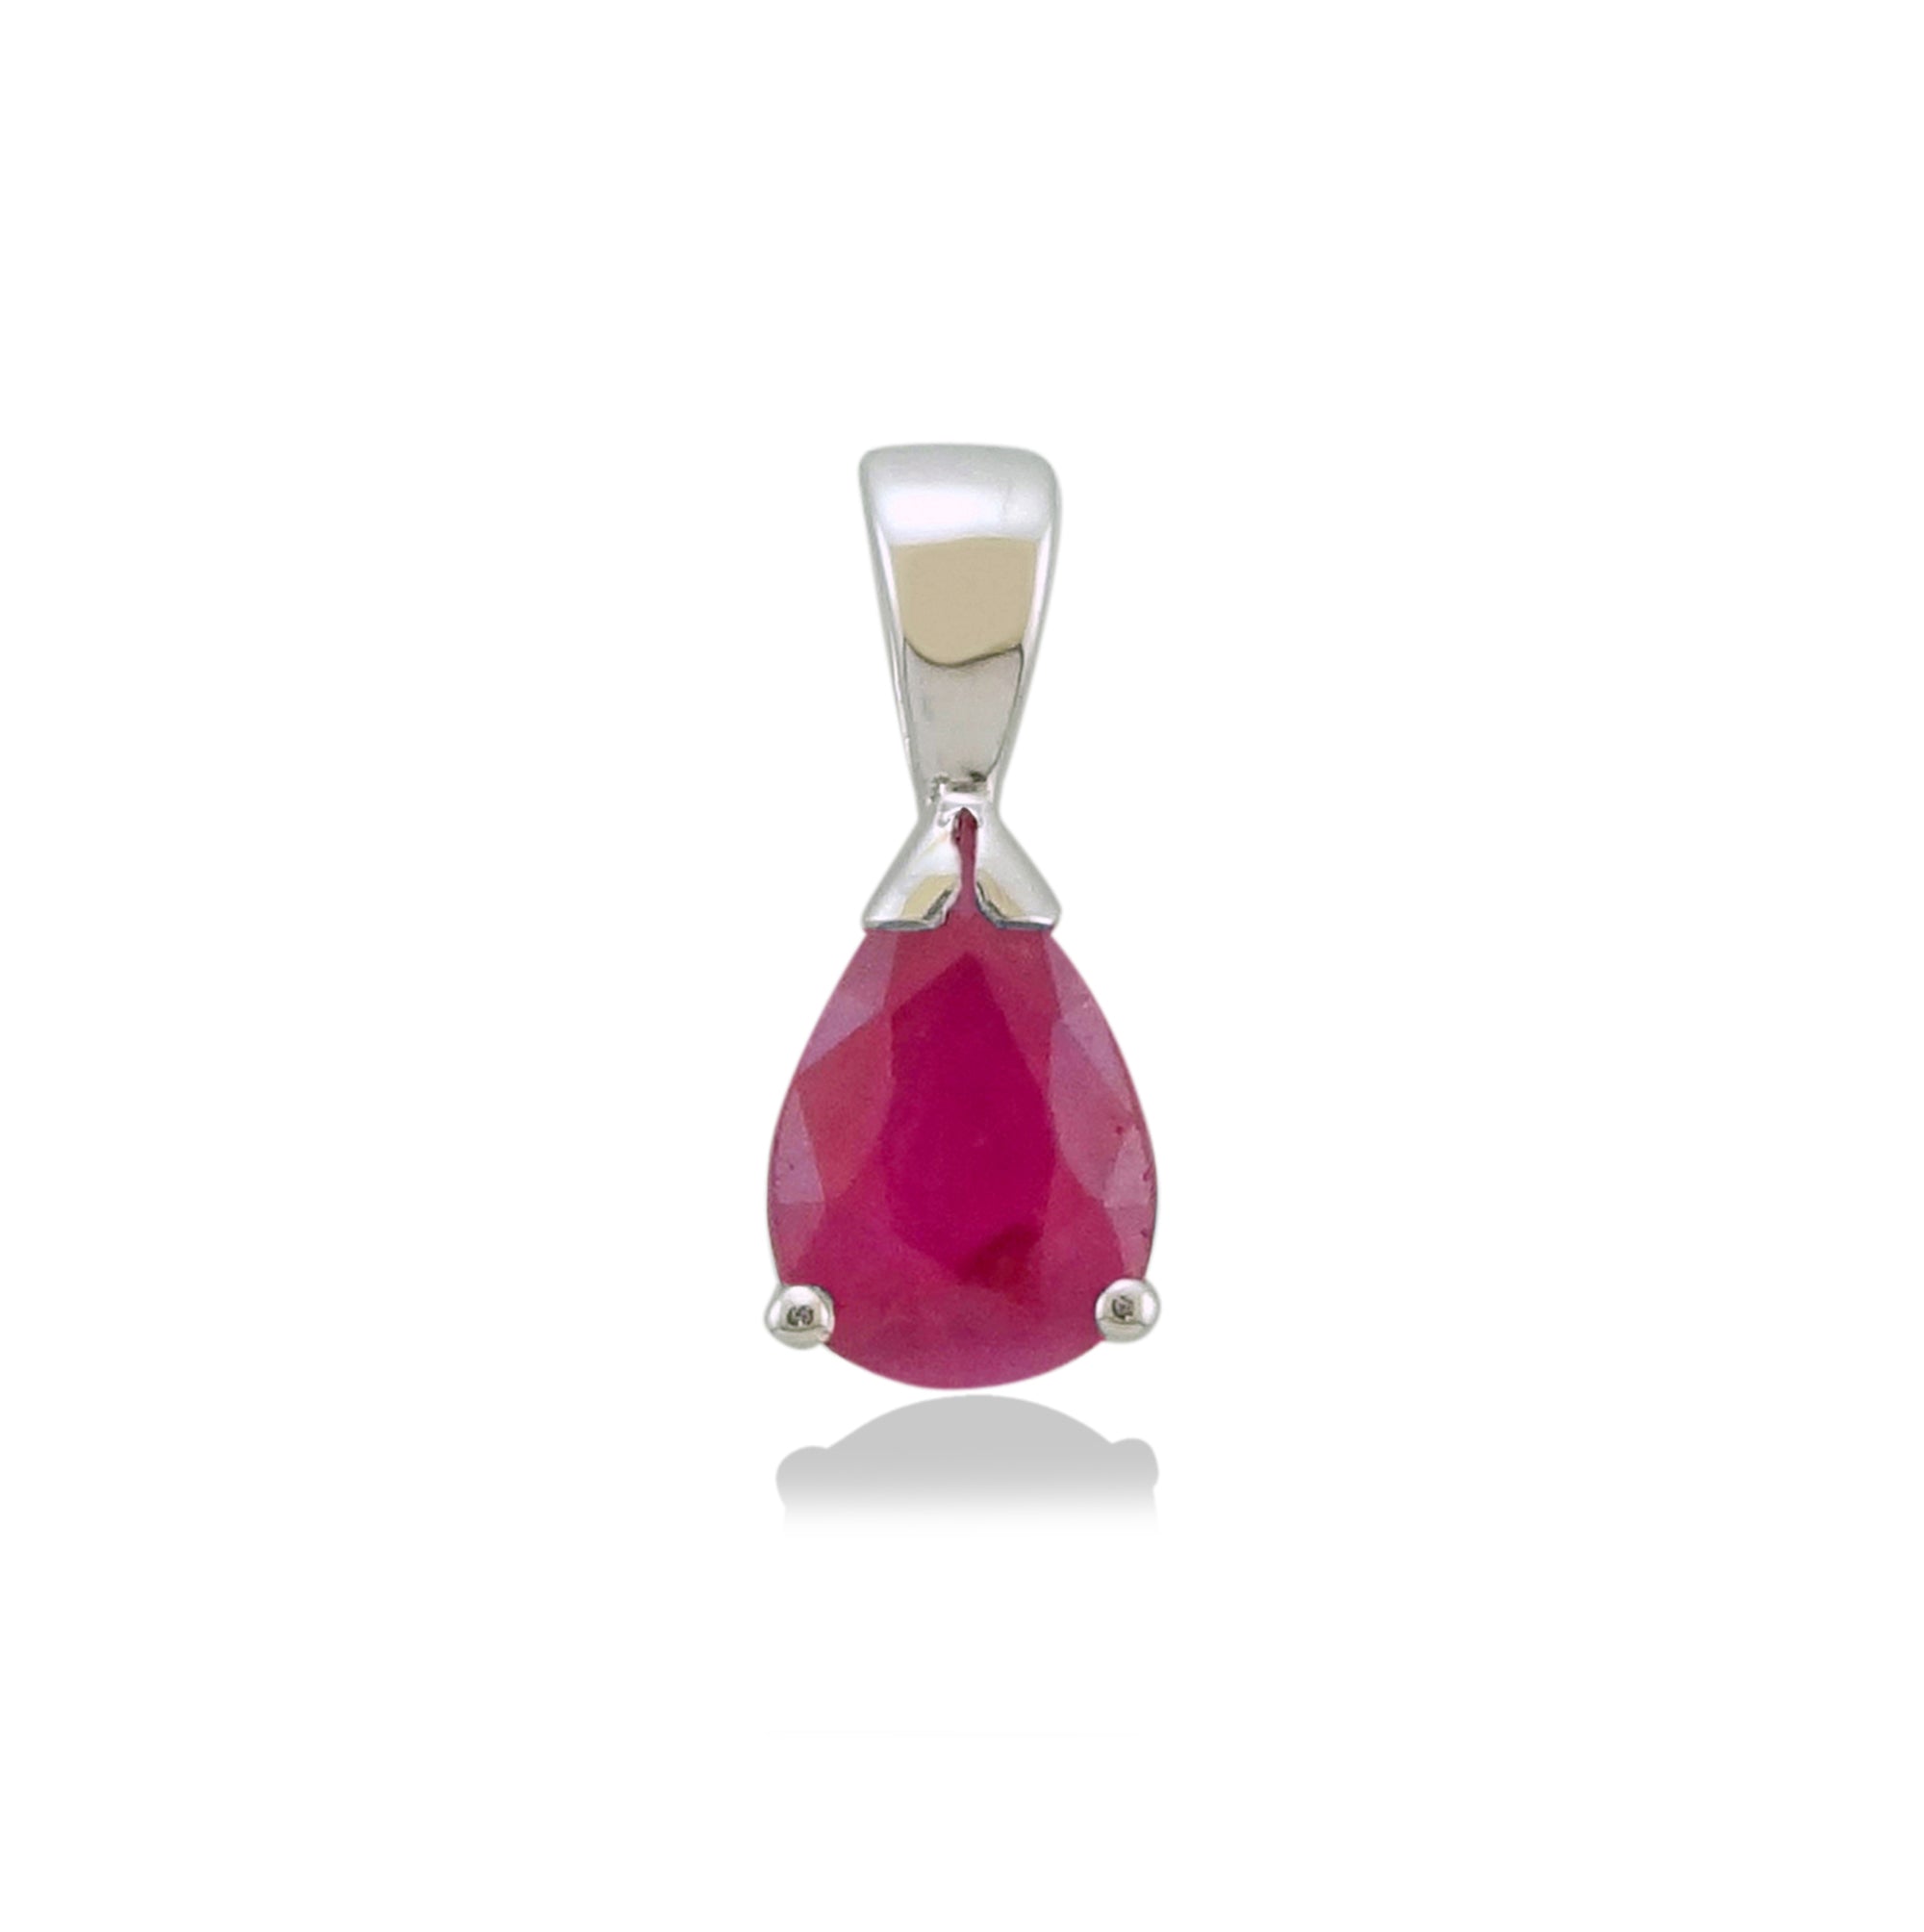 9ct white gold 7x5mm pear shape ruby pendant